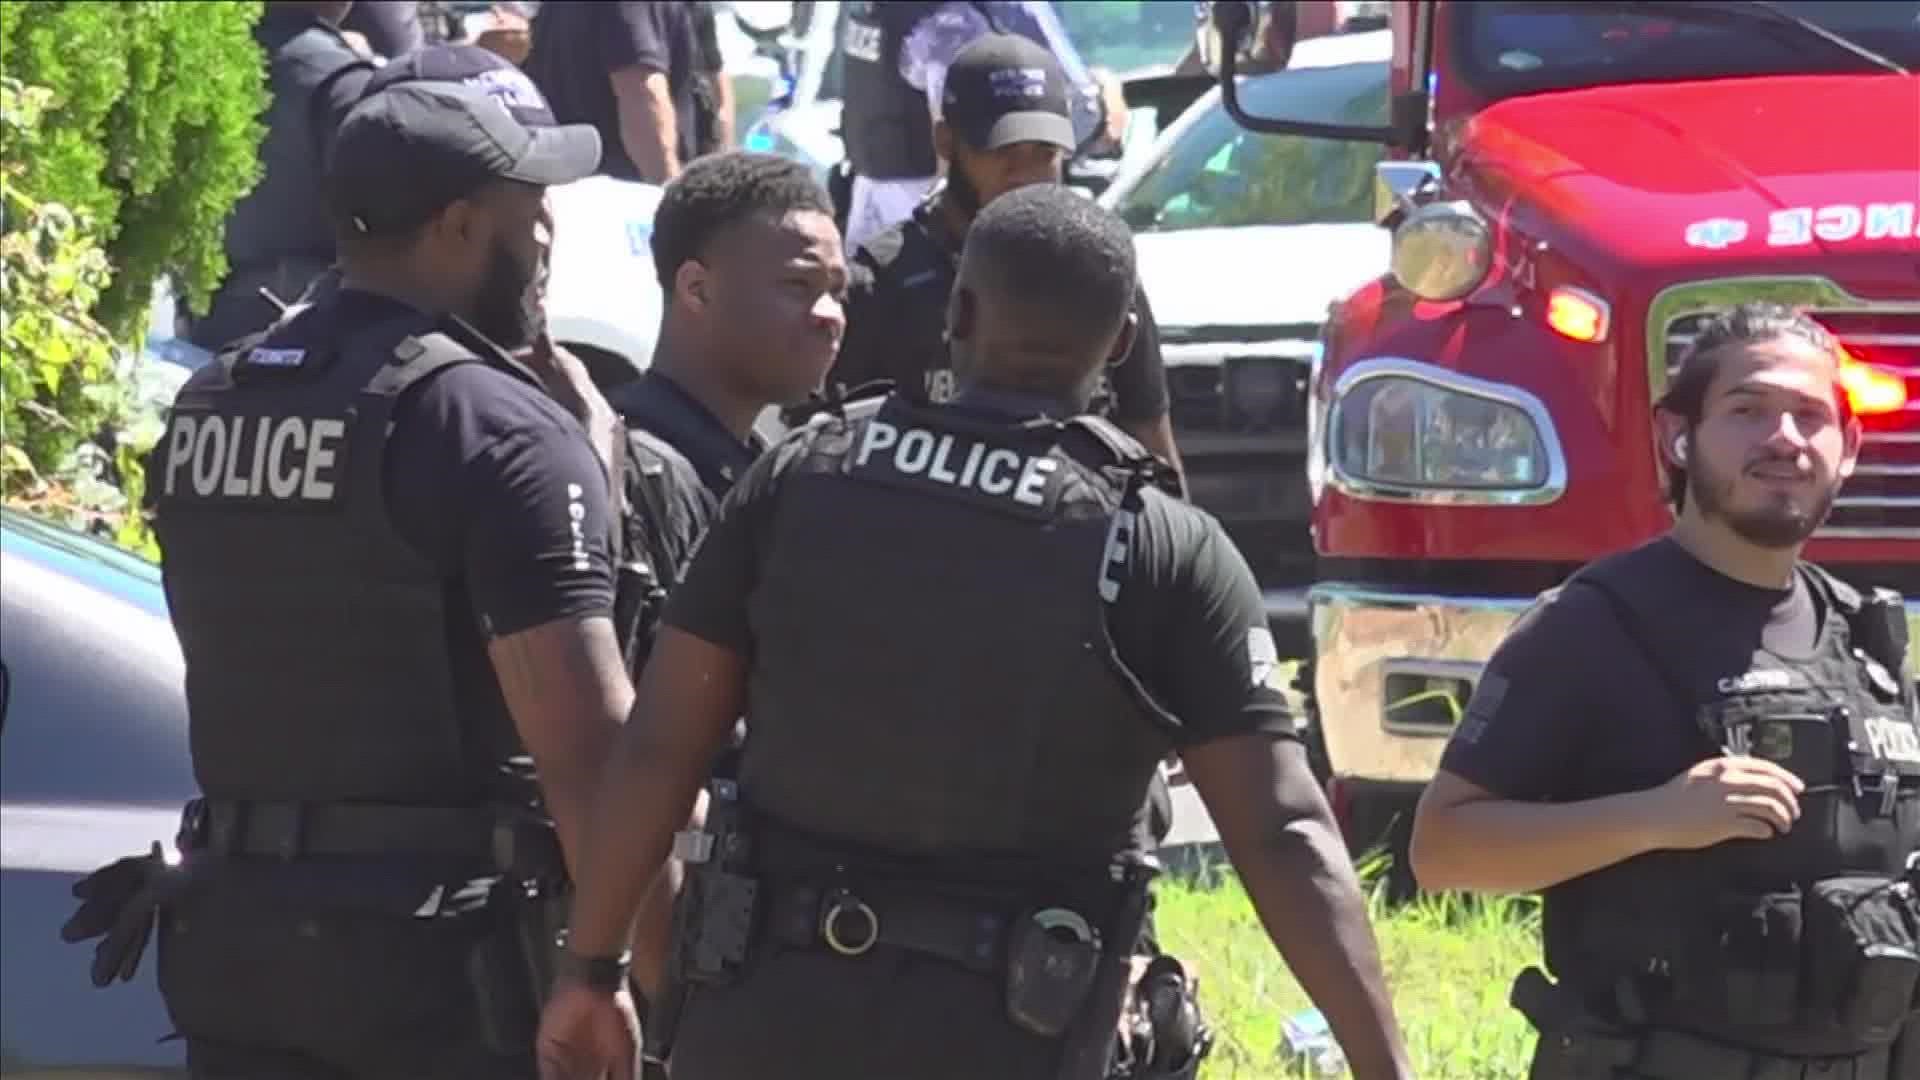 Memphis Police said the officer was shot about 12:45 p.m. Wednesday in the area of Horn Lake Road and Horn Lake Cove during an investigation into auto thefts.